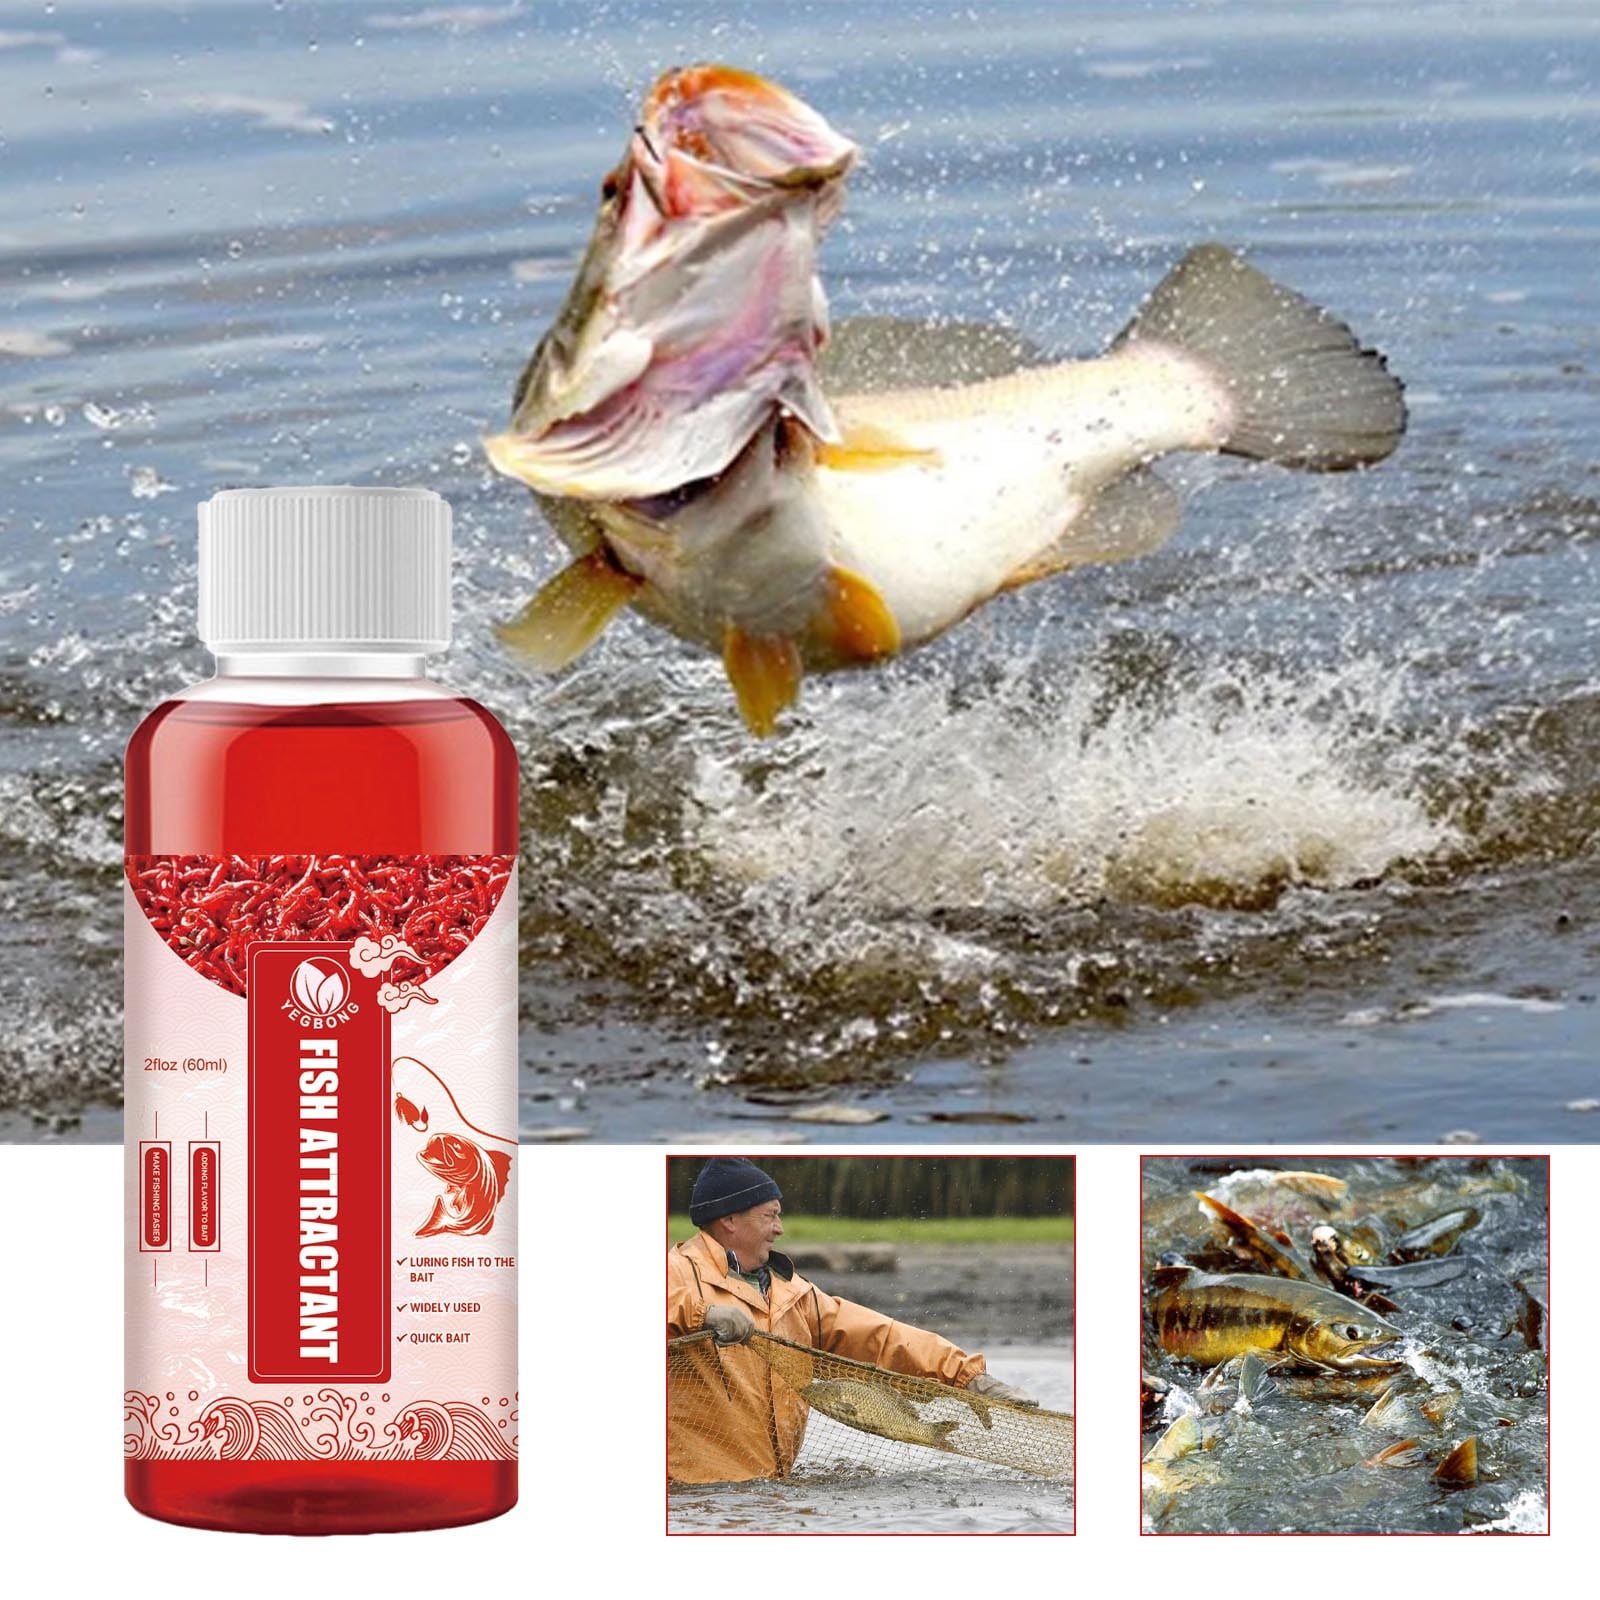 Bait Scent Fish Attractants for Baits - 60ml Fishing Oil for Soft